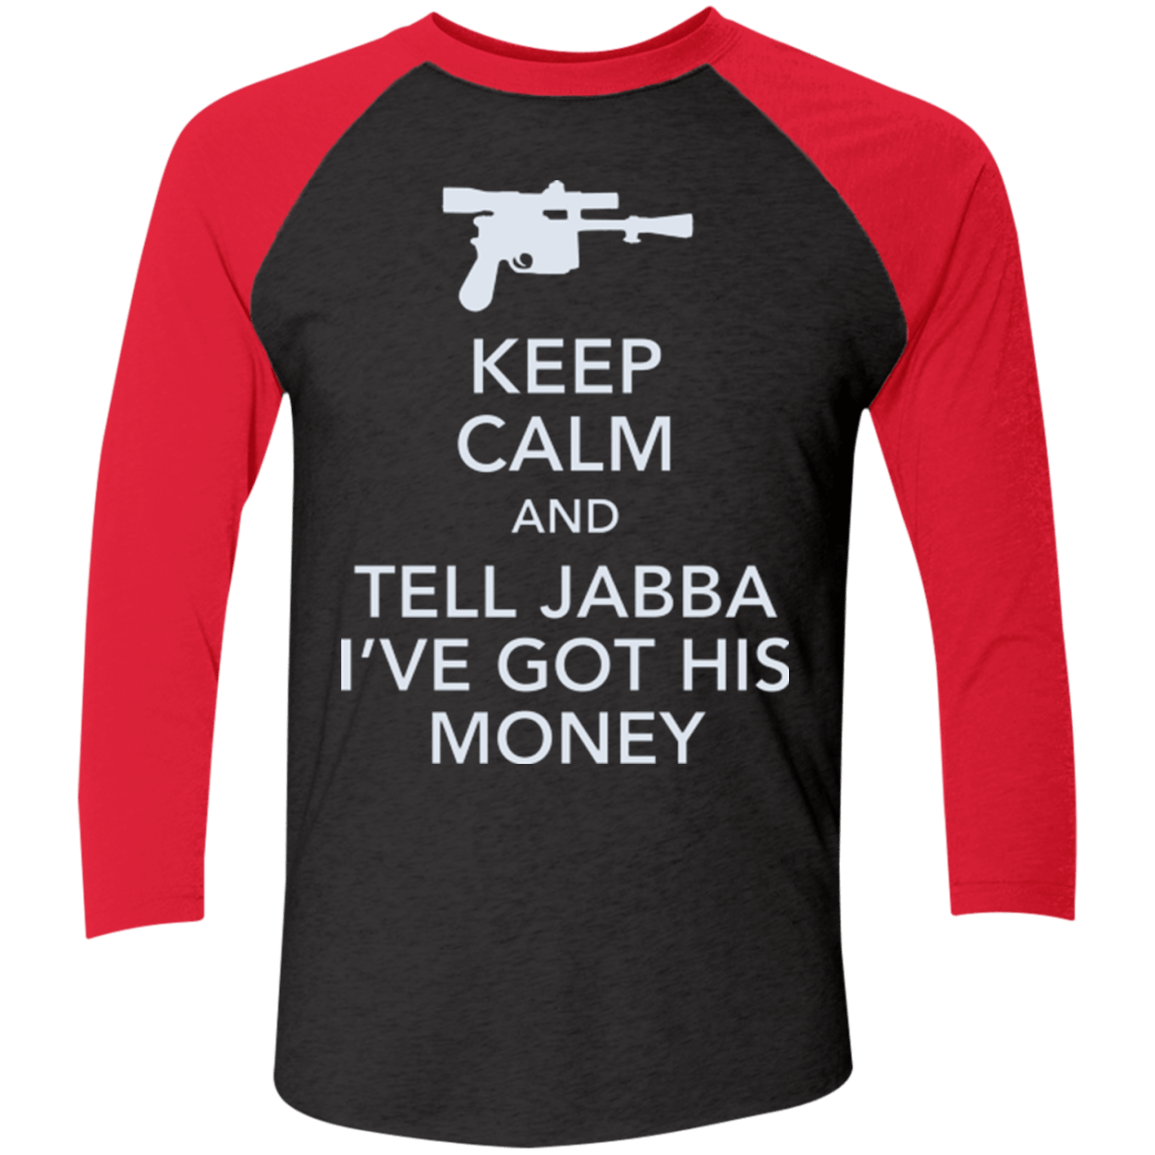 T-Shirts Vintage Black/Vintage Red / X-Small Tell Jabba (2) Men's Triblend 3/4 Sleeve